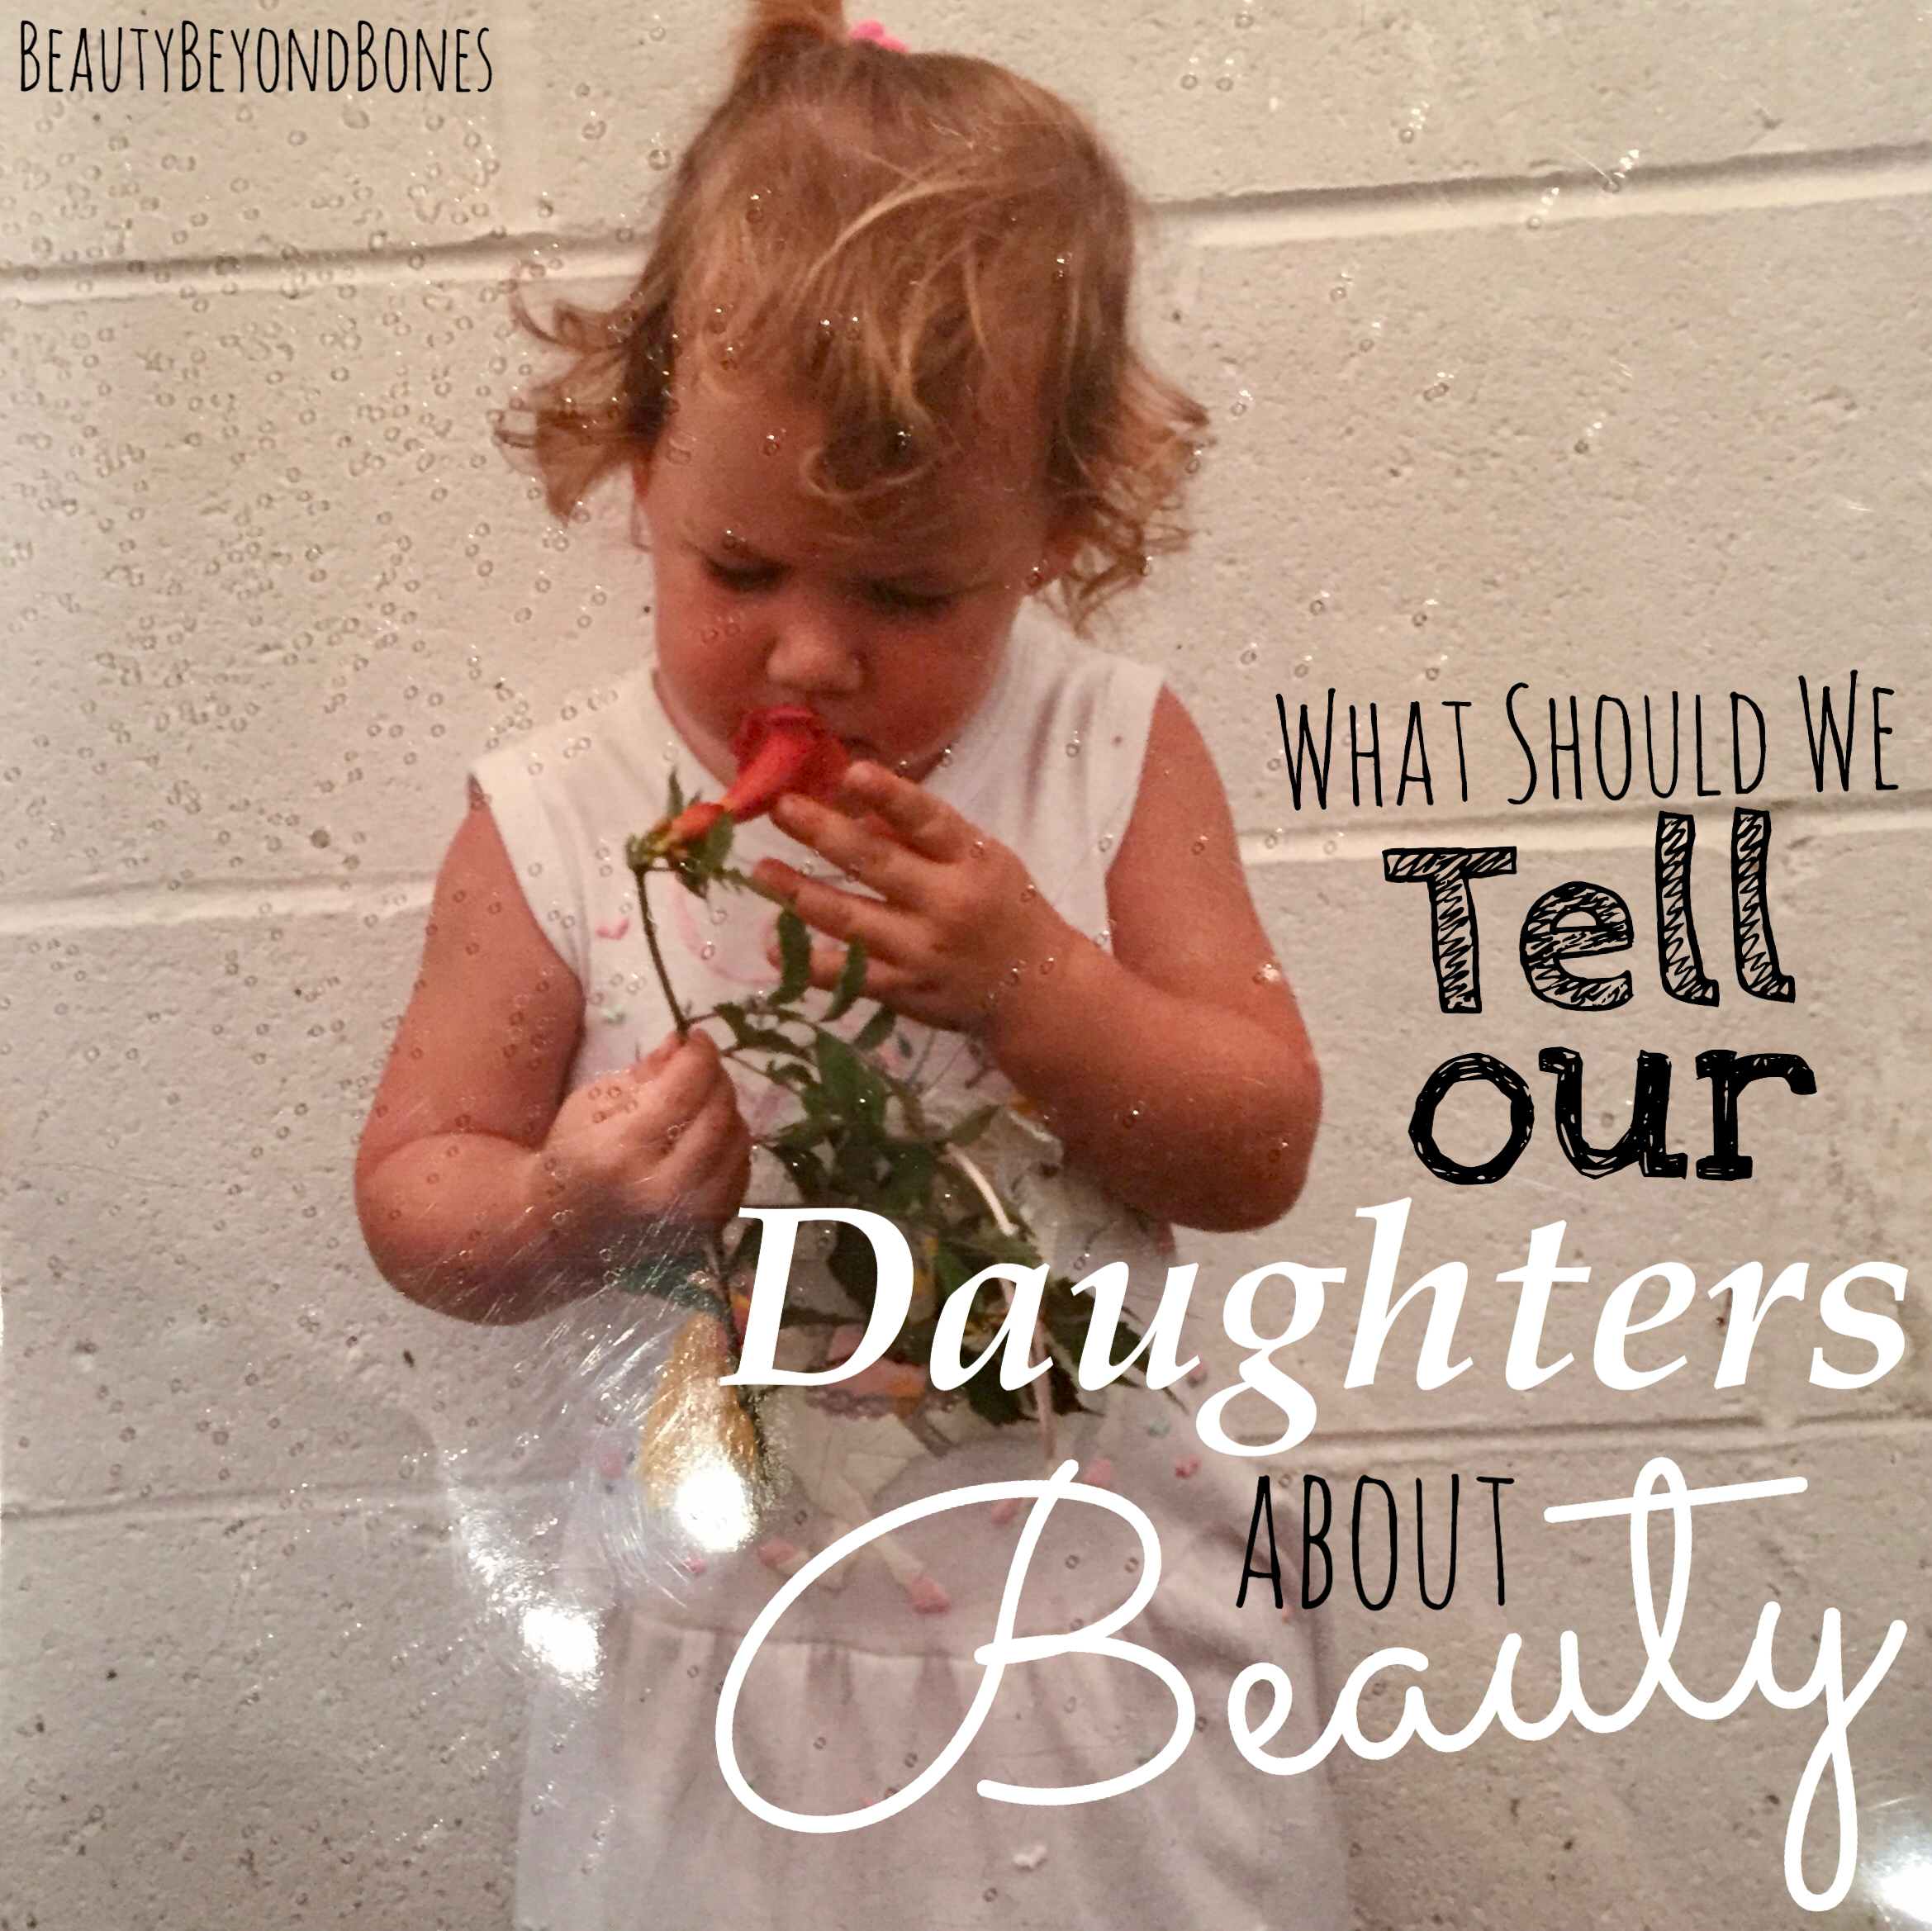 What Should We Tell Our Daughters about Beauty?